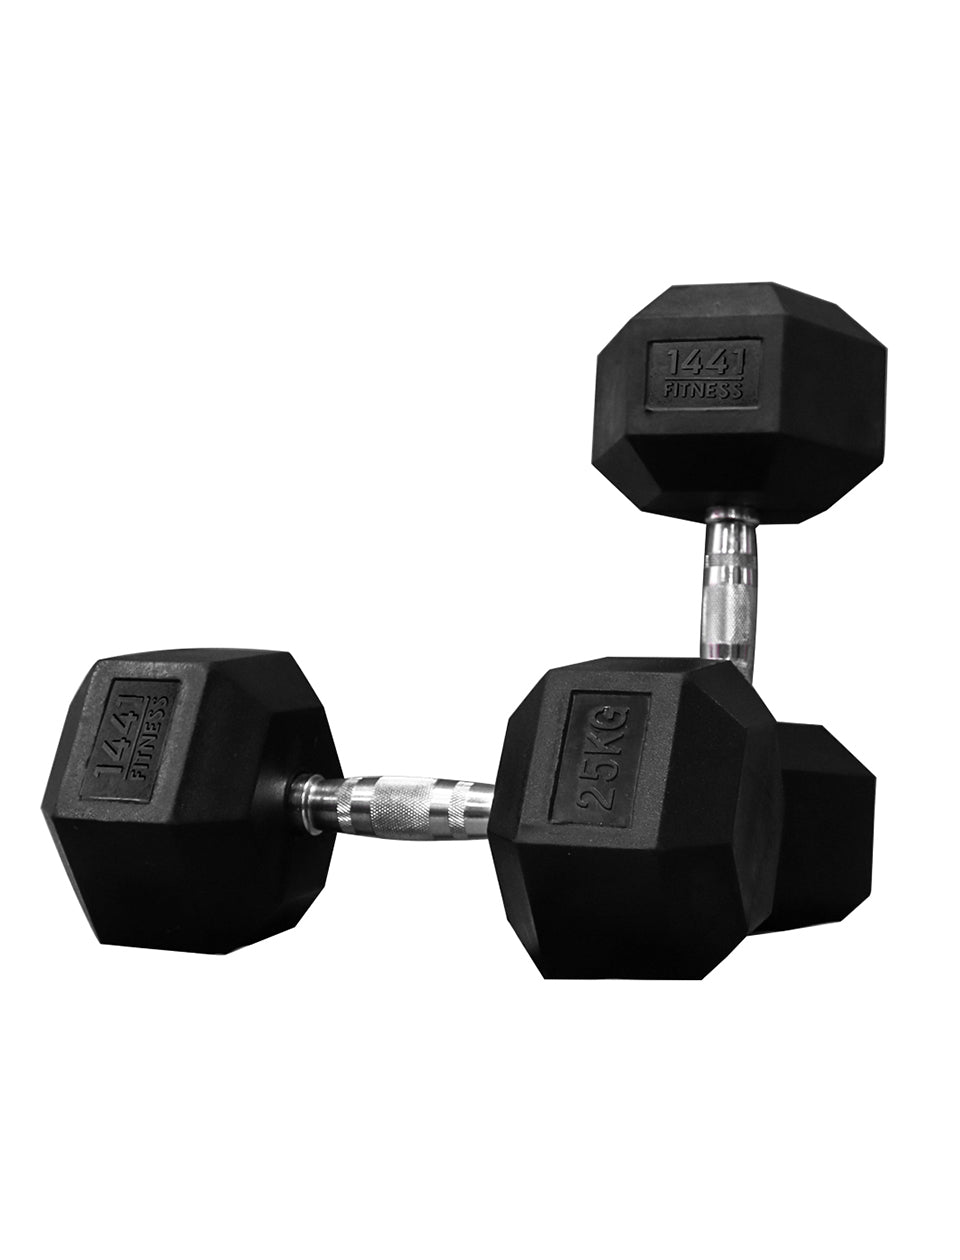 Home & Commercial Gym Equipment for Sale in UAE | Fitness Equipment